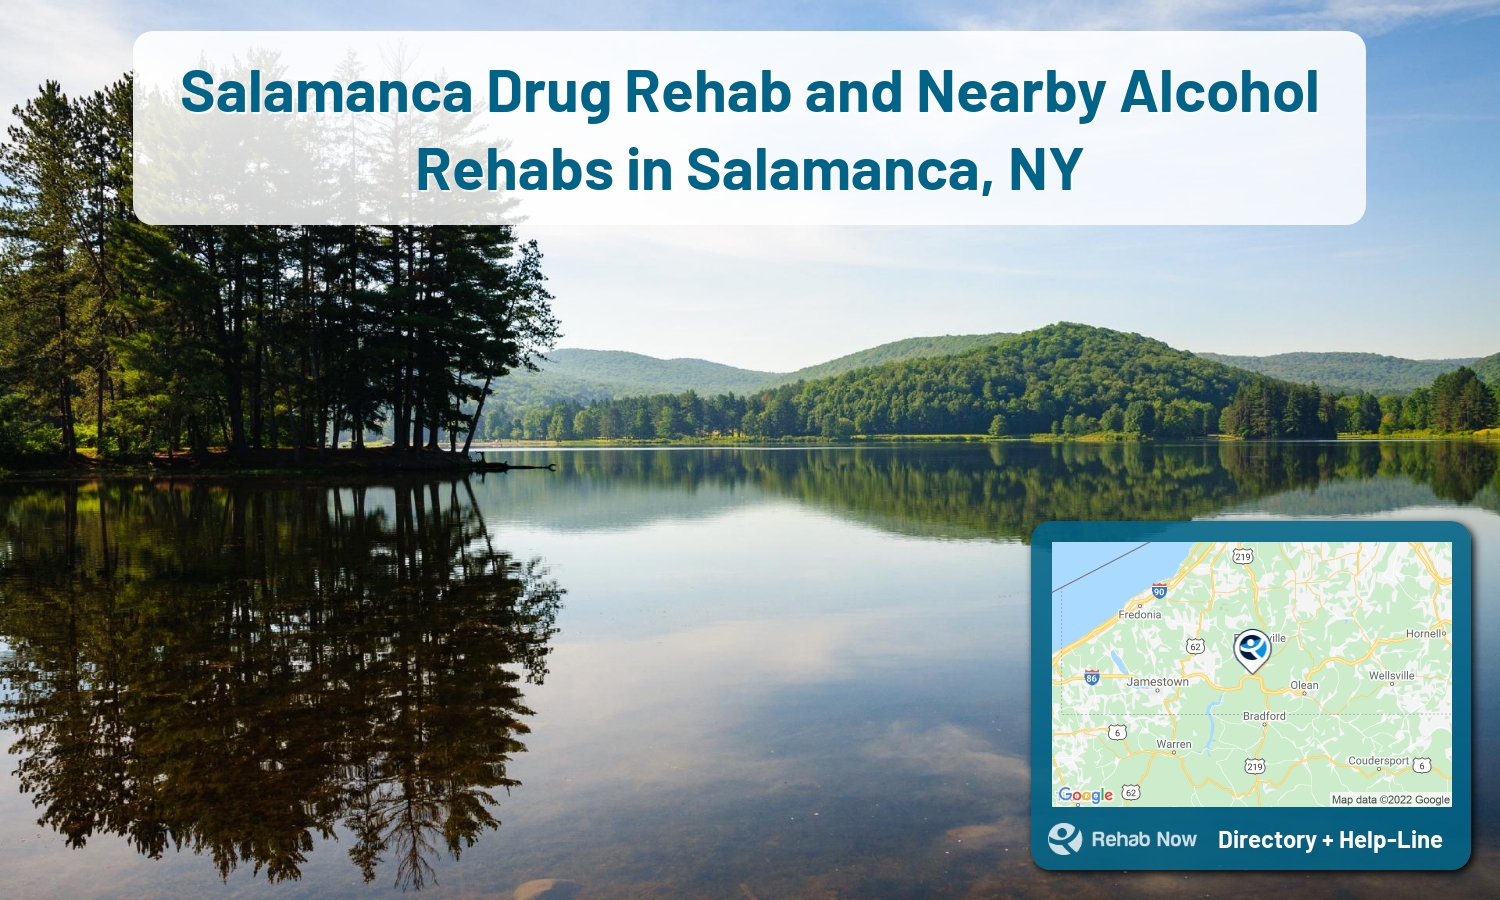 List of alcohol and drug treatment centers near you in Salamanca, New York. Research certifications, programs, methods, pricing, and more.